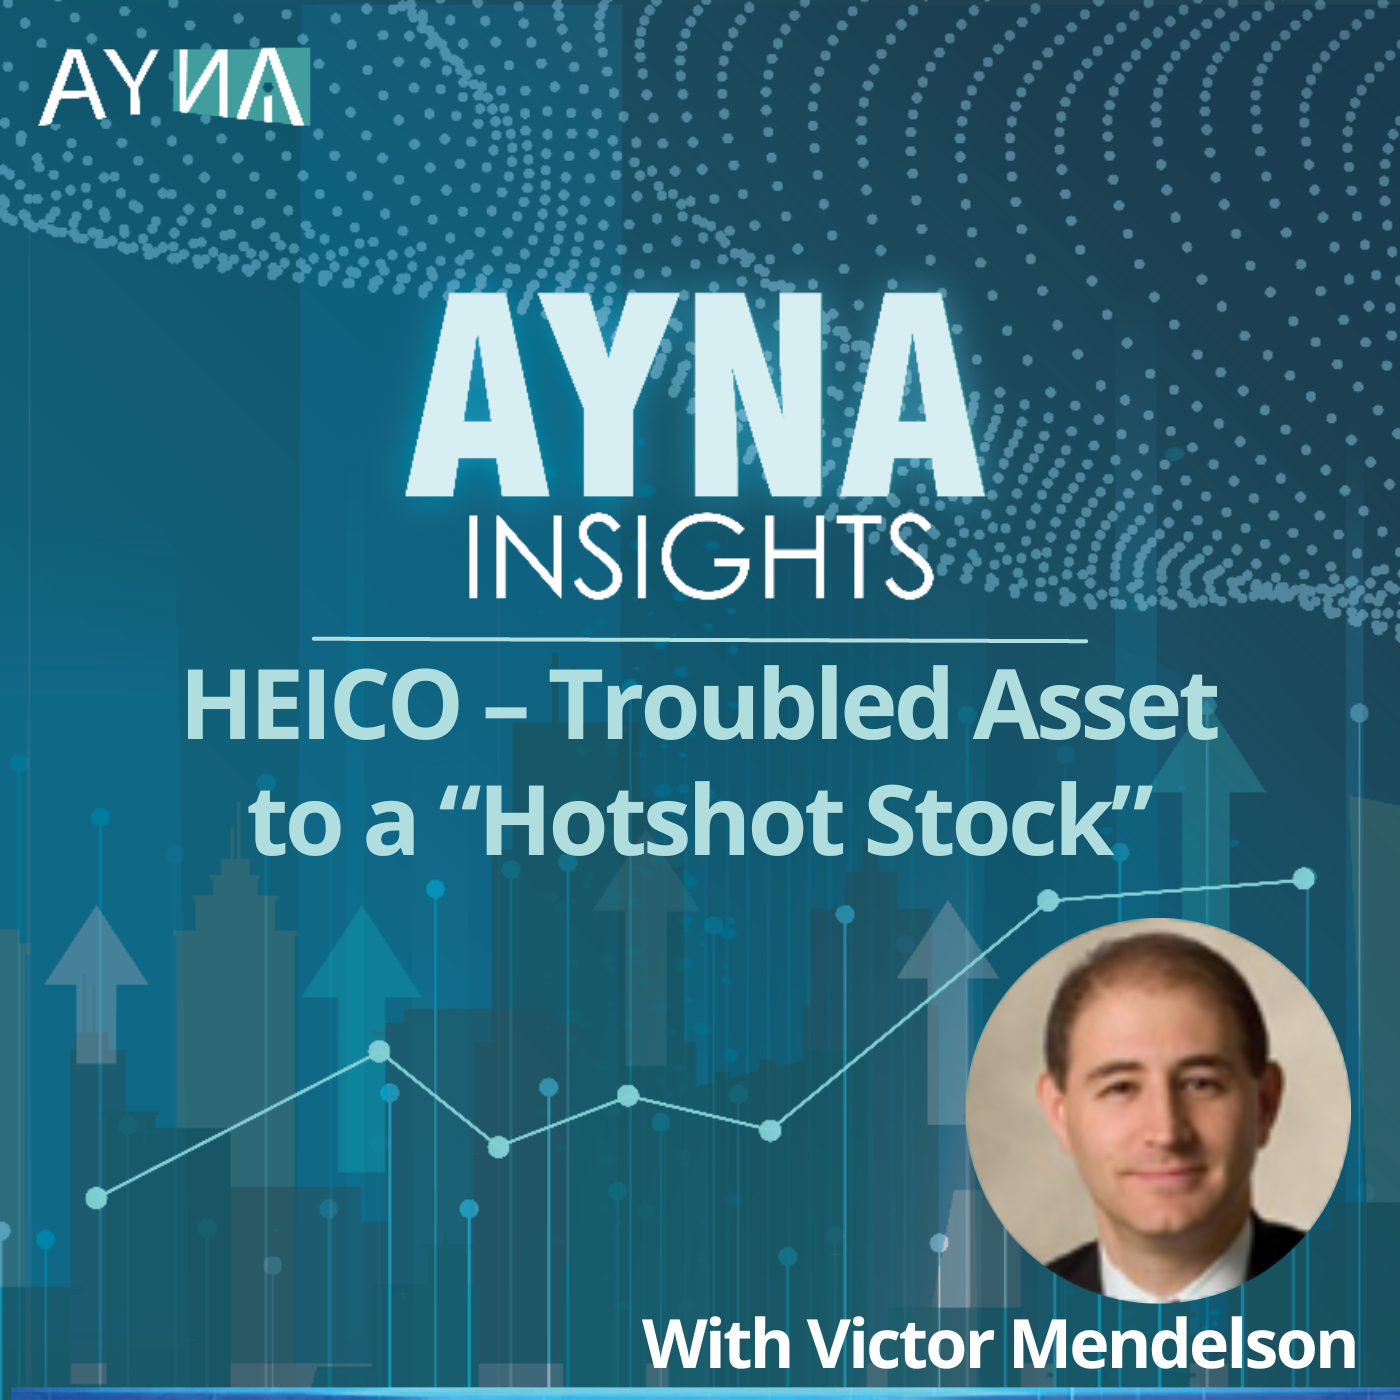 Victor Mendelson: HEICO – Troubled Asset to a “Hotshot Stock”